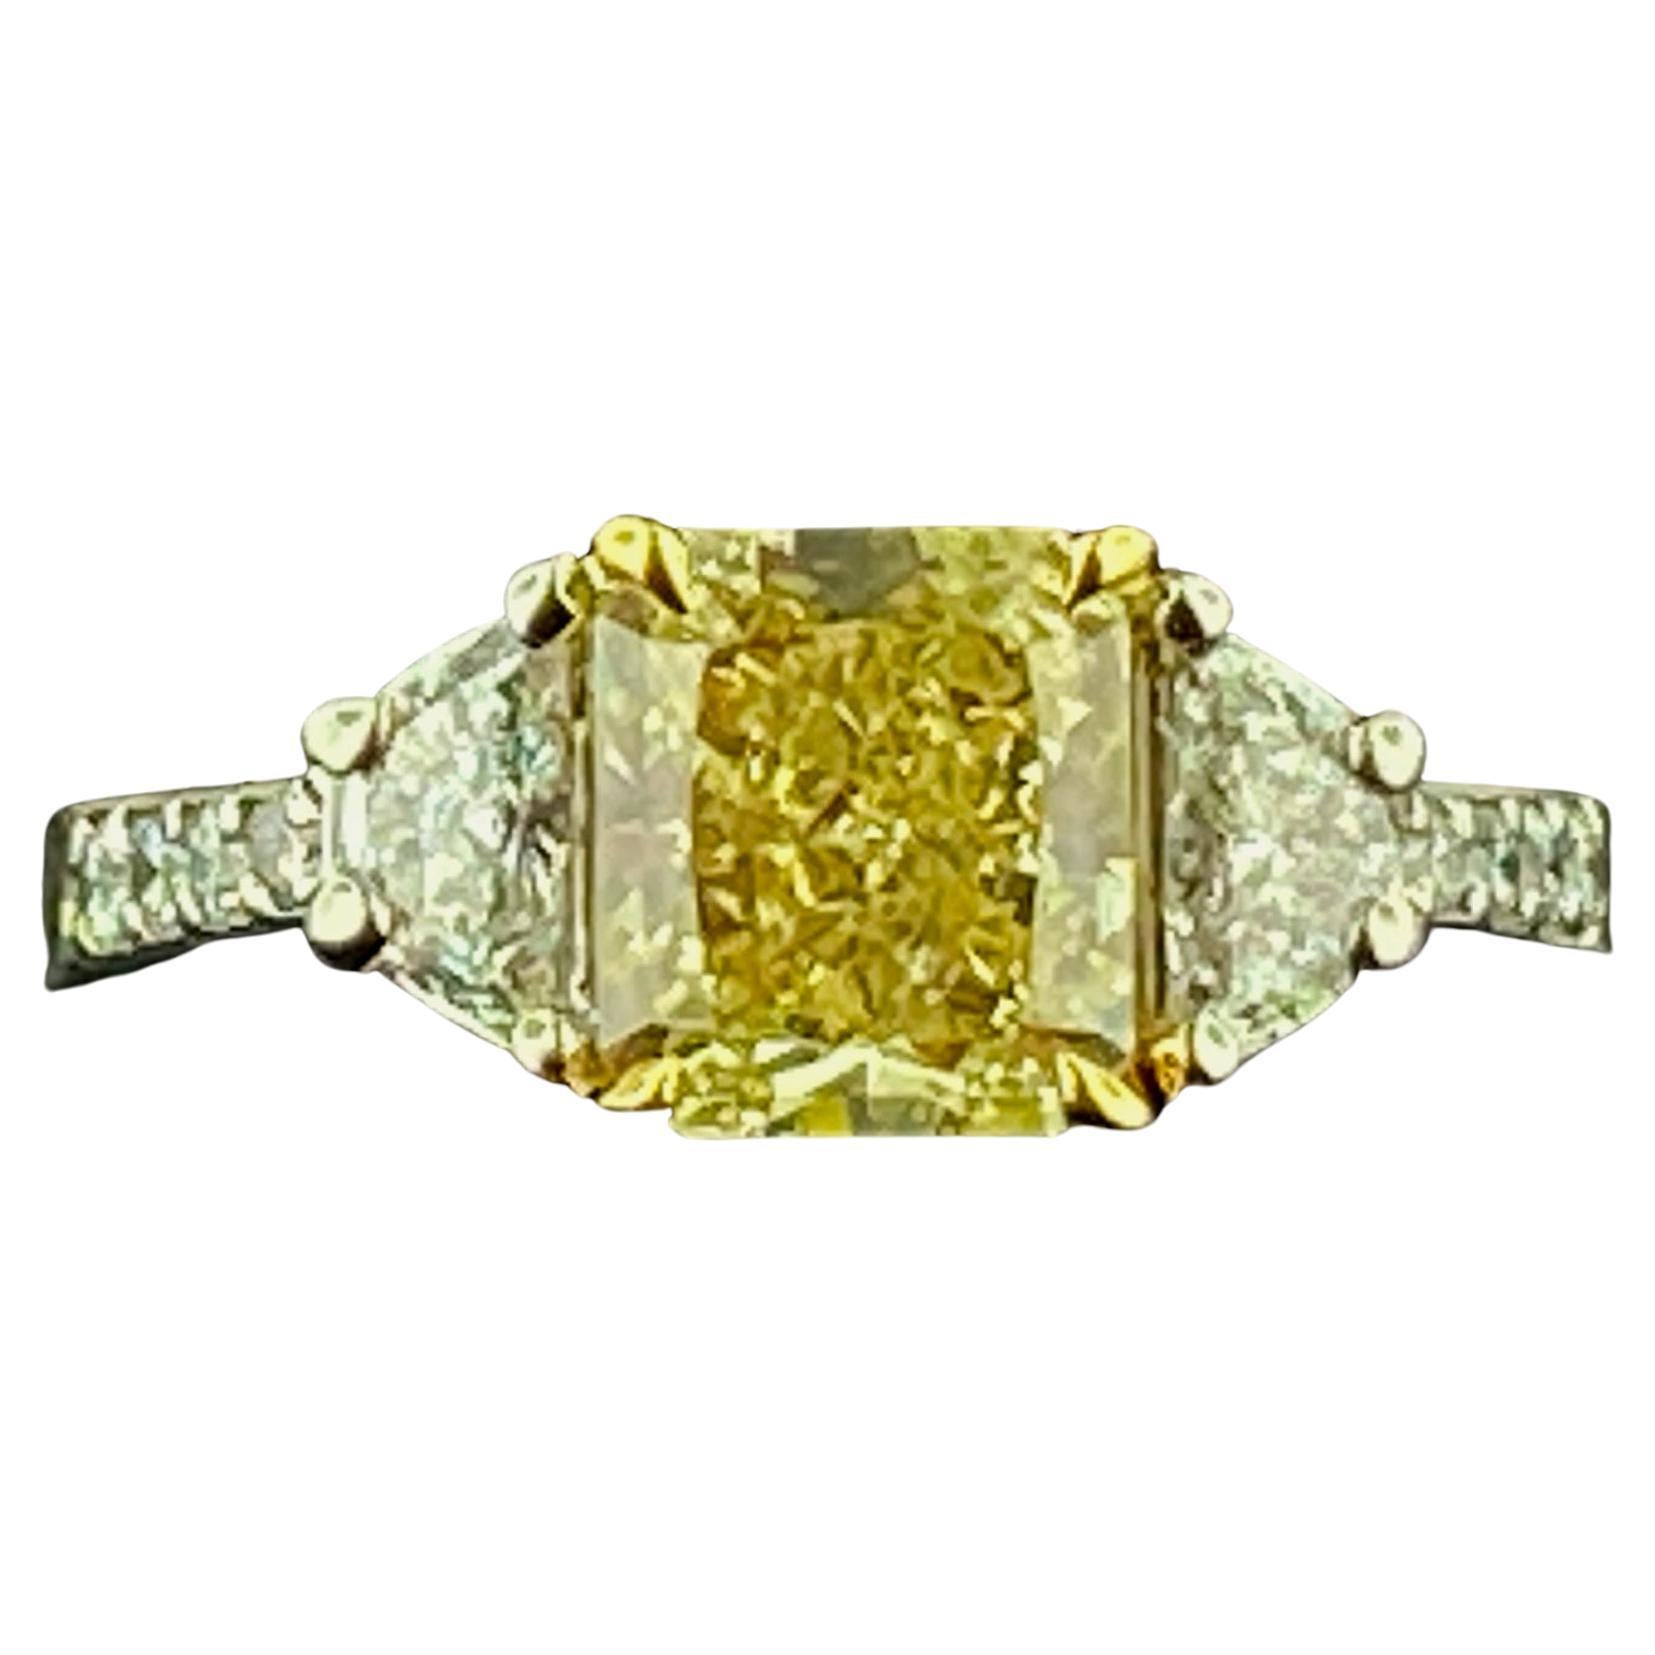 22 KT Yellow Gold & Platinum 1.82 Ct Fancy Yellow Radiant Cut Diamond Ring For Sale